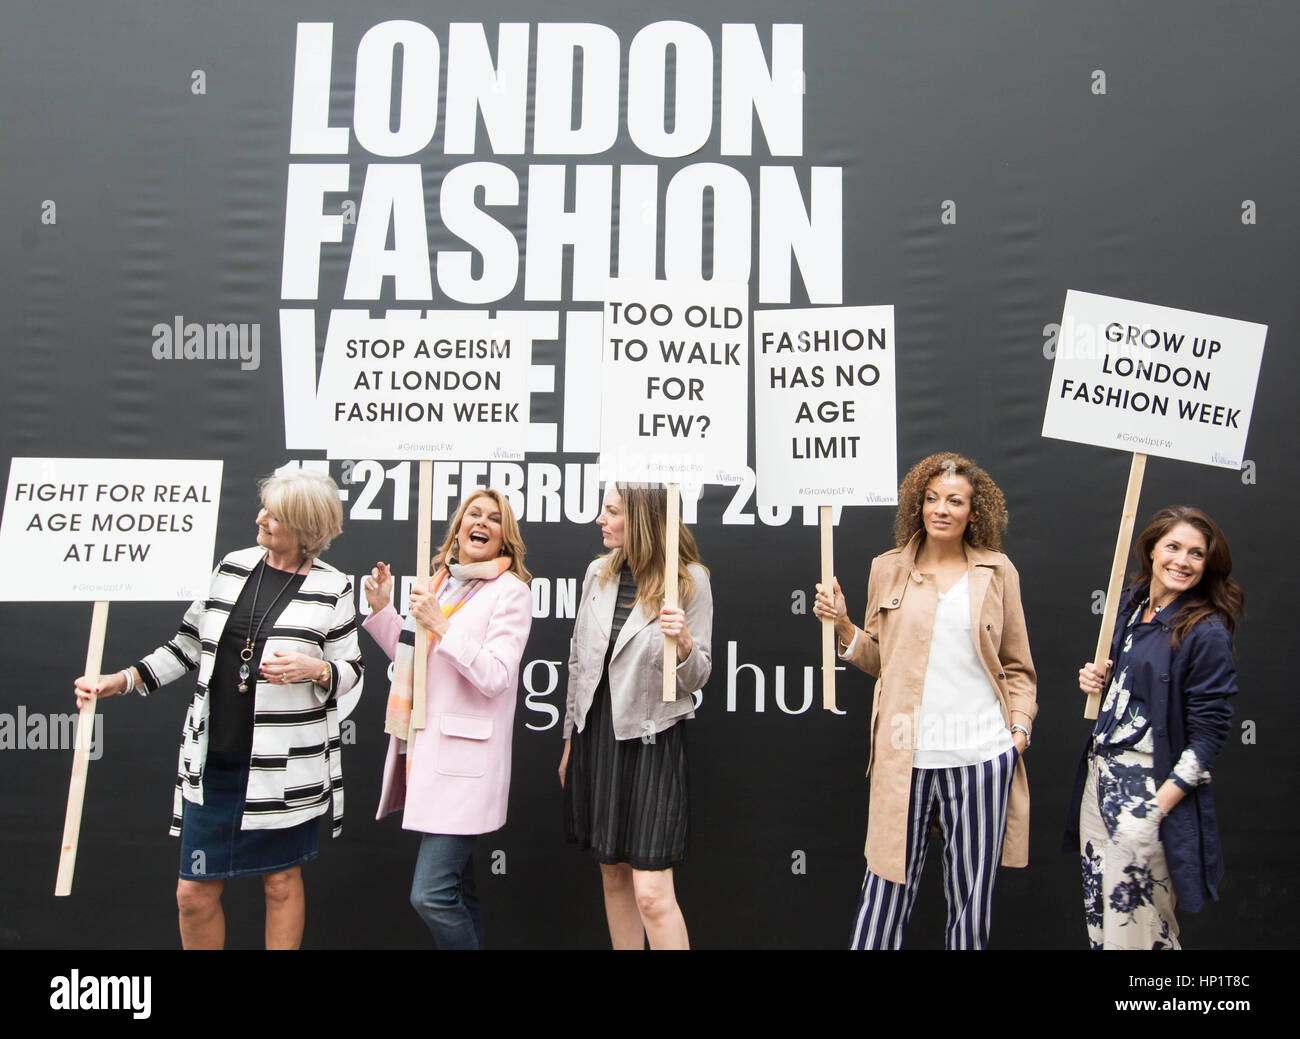 EDITORIAL USE ONLY (Left to right) Janie Felstead, 65, Jilly Johnson, 63, Liz Horne, Brucella Newman-Persaud and Gina Michel, take part in a mature models protest on the Strand in London, as retailer JD Williams demonstrates against ageism at London Fashion Week. Stock Photo